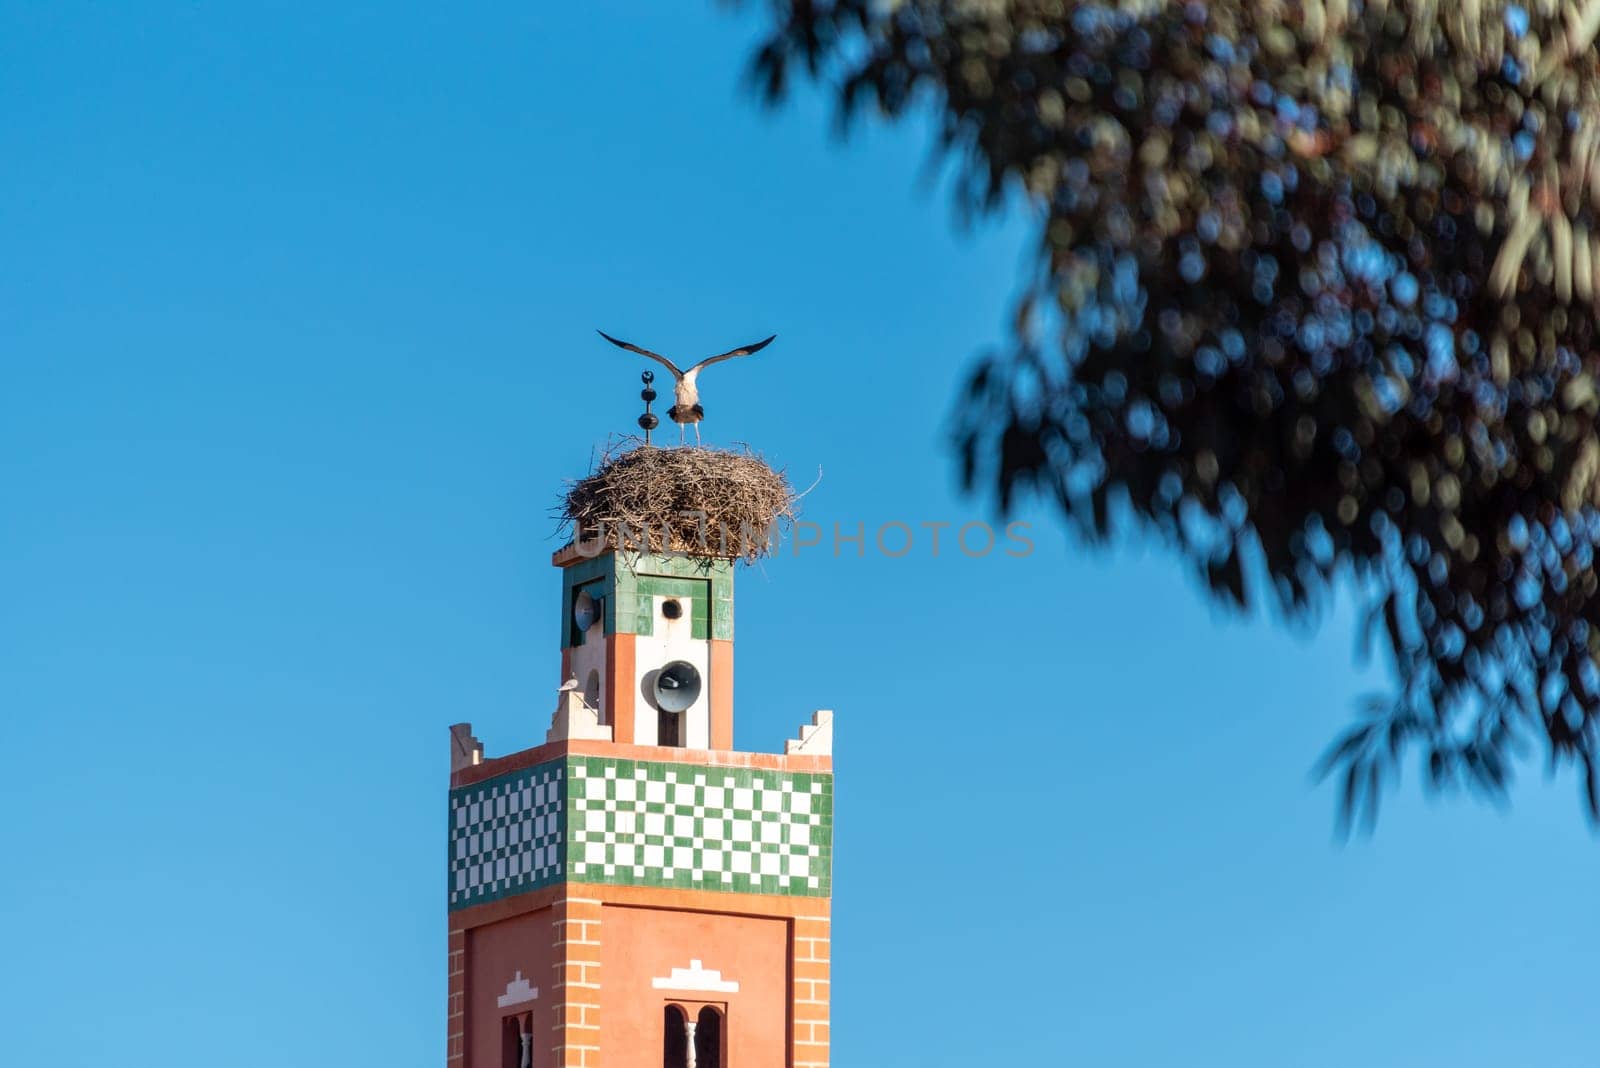 Two birds in their nest on a minaret of a Moroccan mosque in Ouarzazate